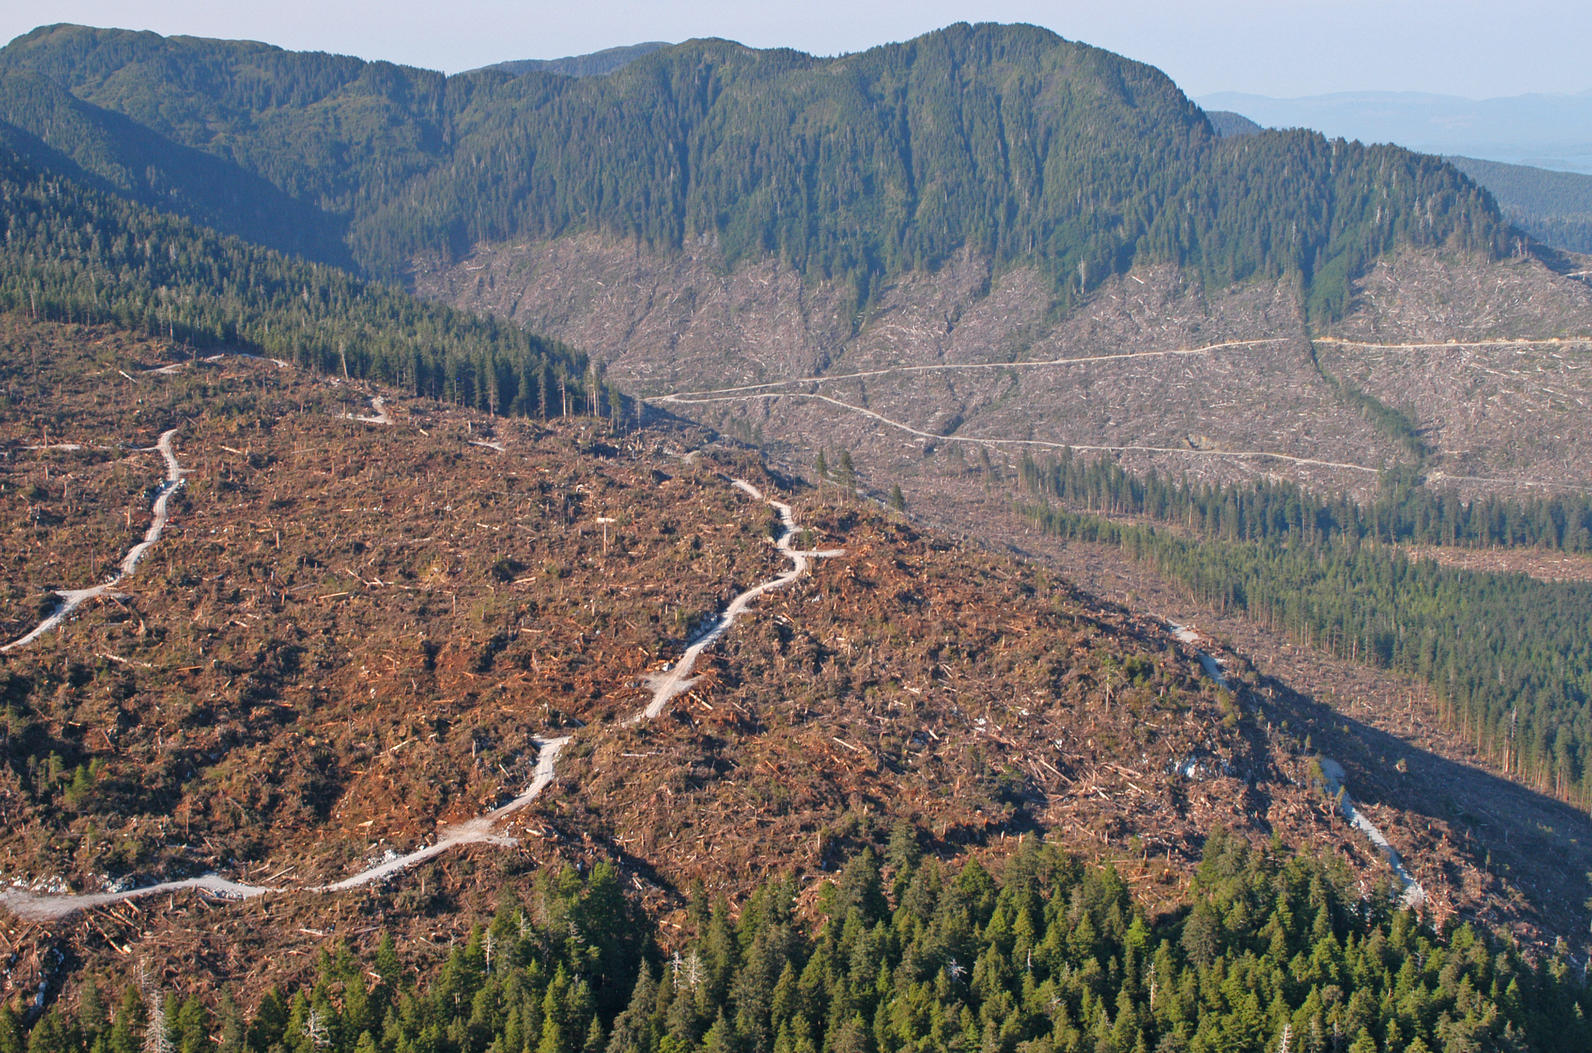 Clearcut logging in the Tongass.